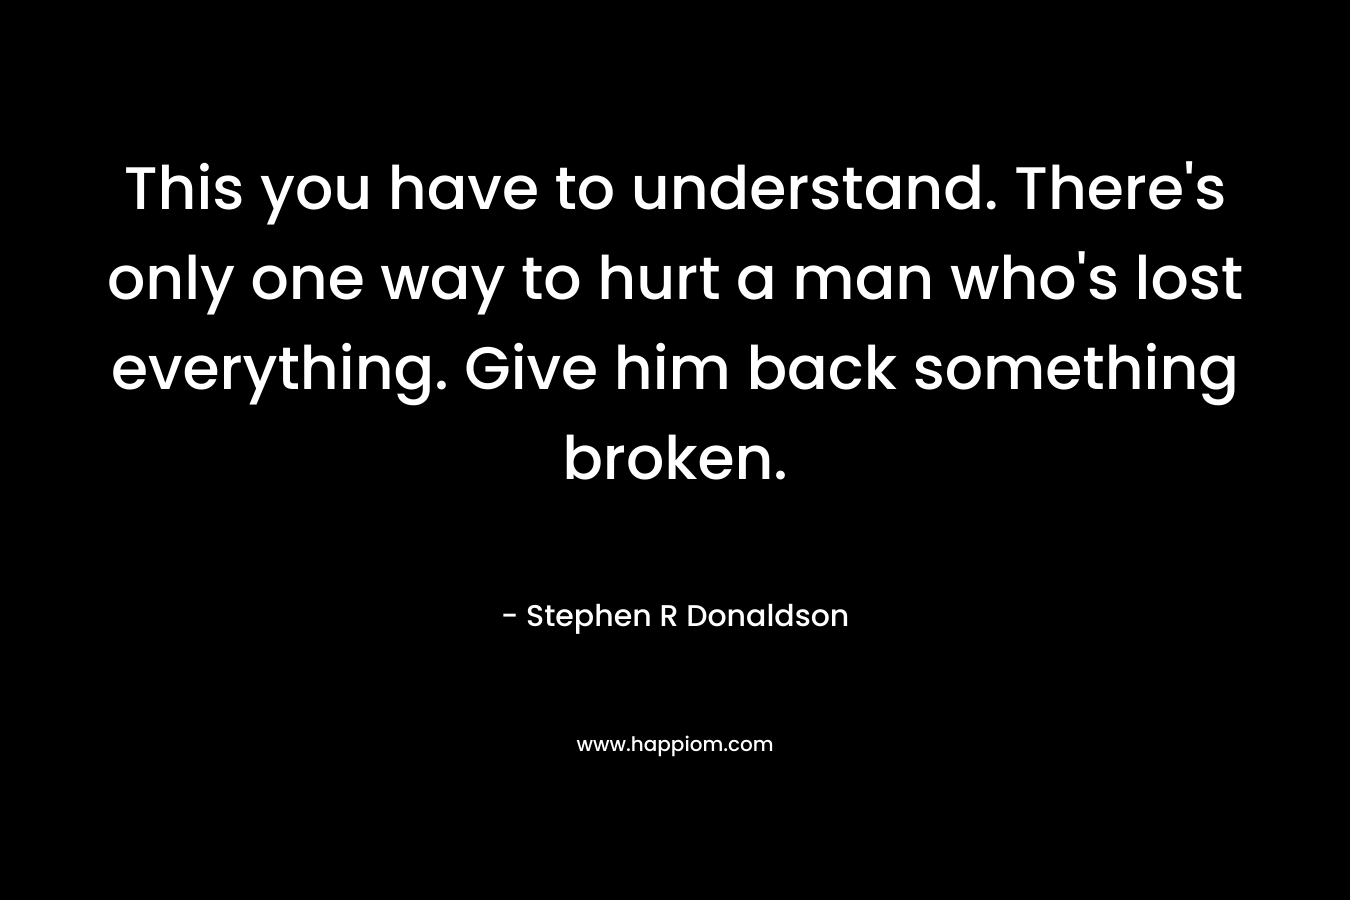 This you have to understand. There's only one way to hurt a man who's lost everything. Give him back something broken.